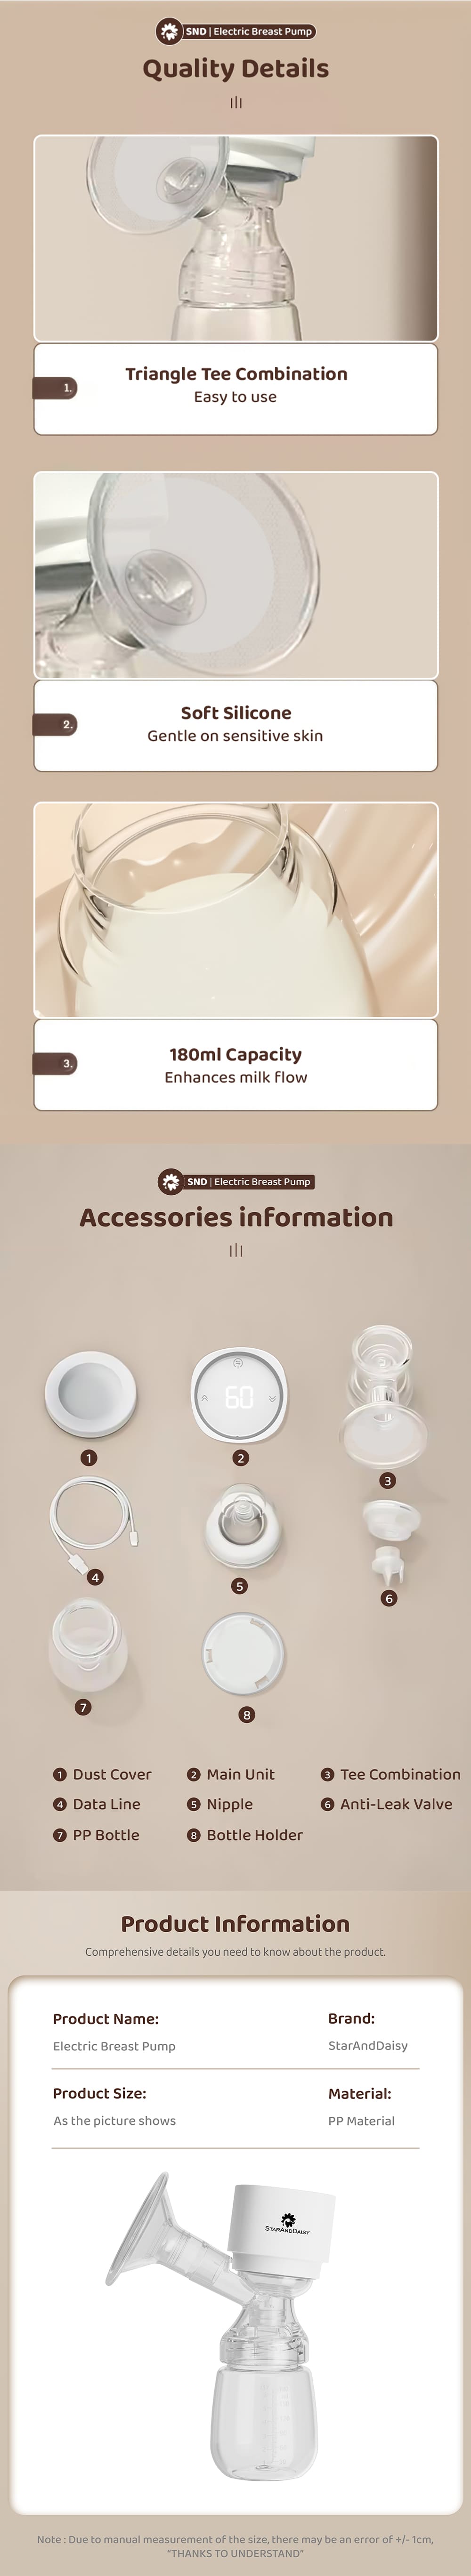 Specification of Breast Pump